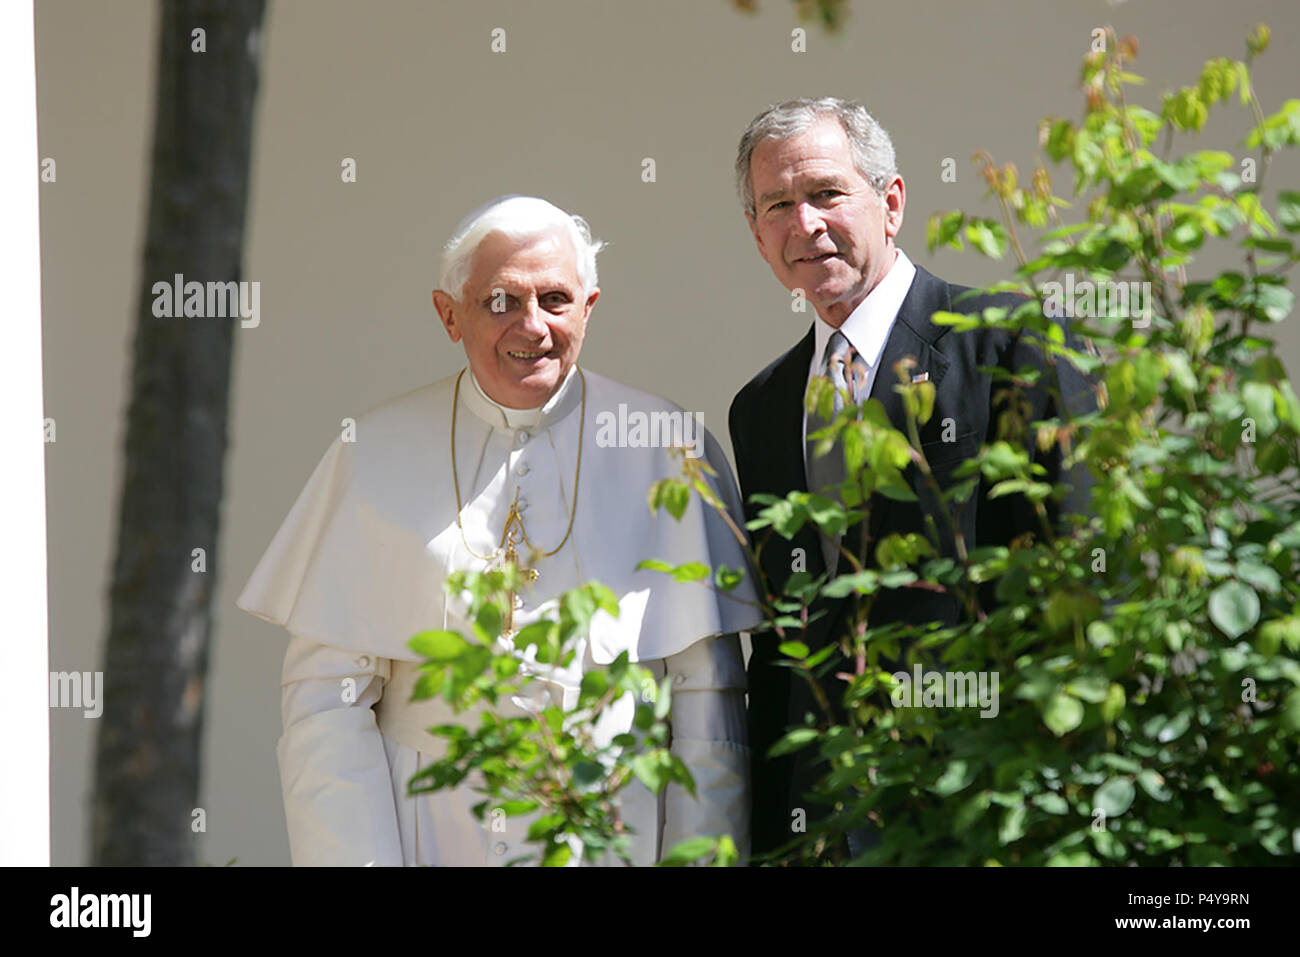 President George W. Bush and Pope Benedict XVI pause along the White House Colonnade to look at the Rose Garden on their way for a meeting in the Oval Office Wednesday, April 16, 2008, following the Pope's welcoming ceremony on the South Lawn of the White House. Stock Photo